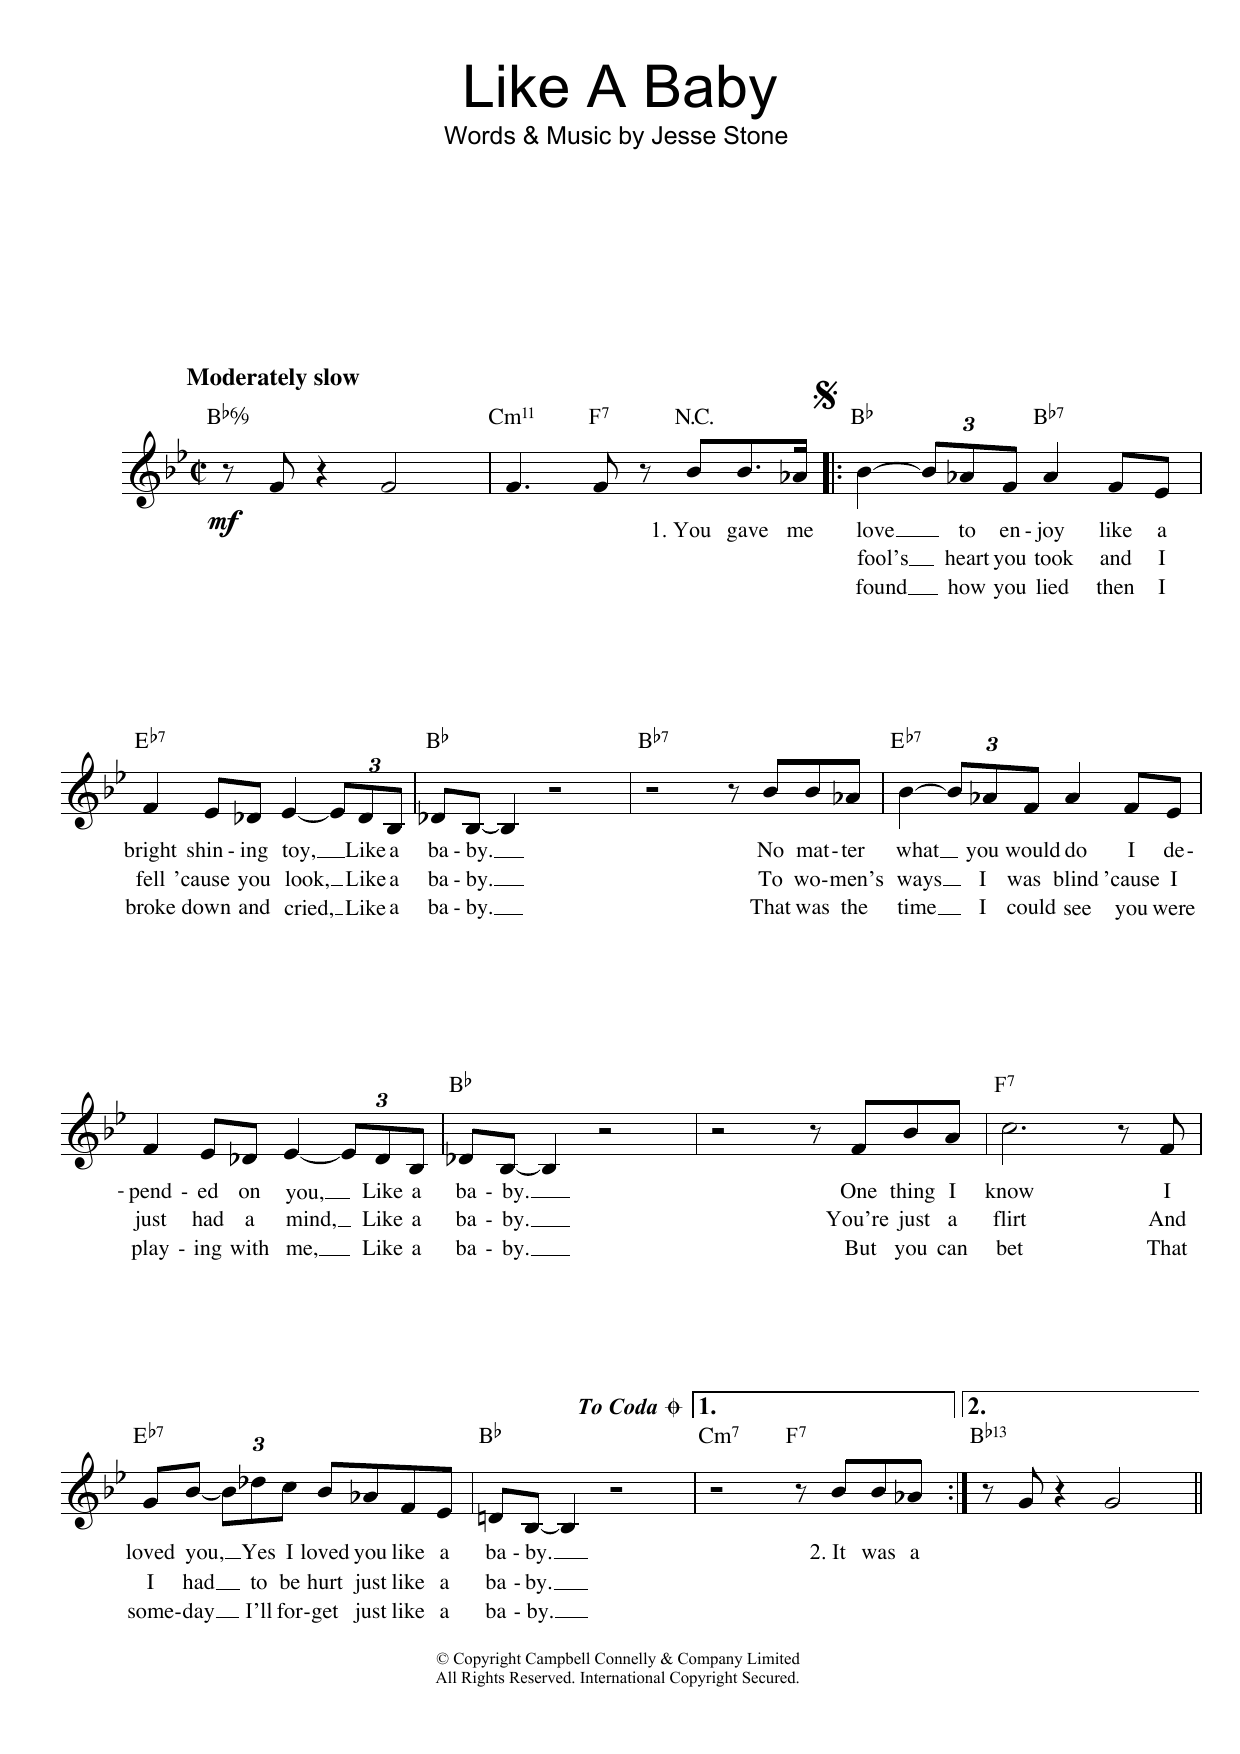 Jesse Stone Like A Baby sheet music notes and chords. Download Printable PDF.